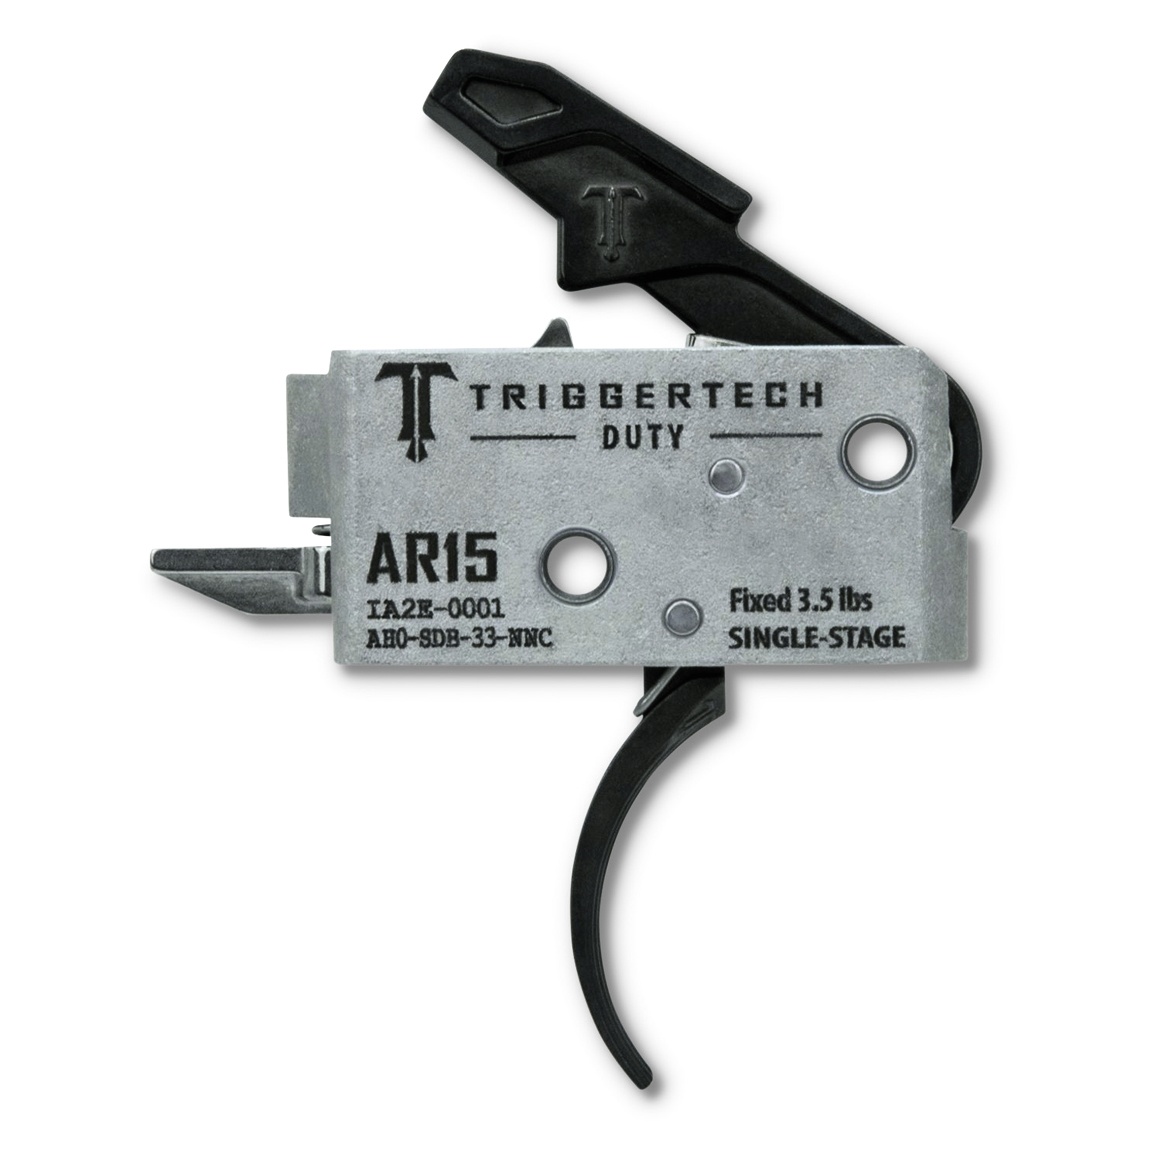 TriggerTech AR-15 Duty Line Curved Single-Stage Trigger, 3.5-lb.